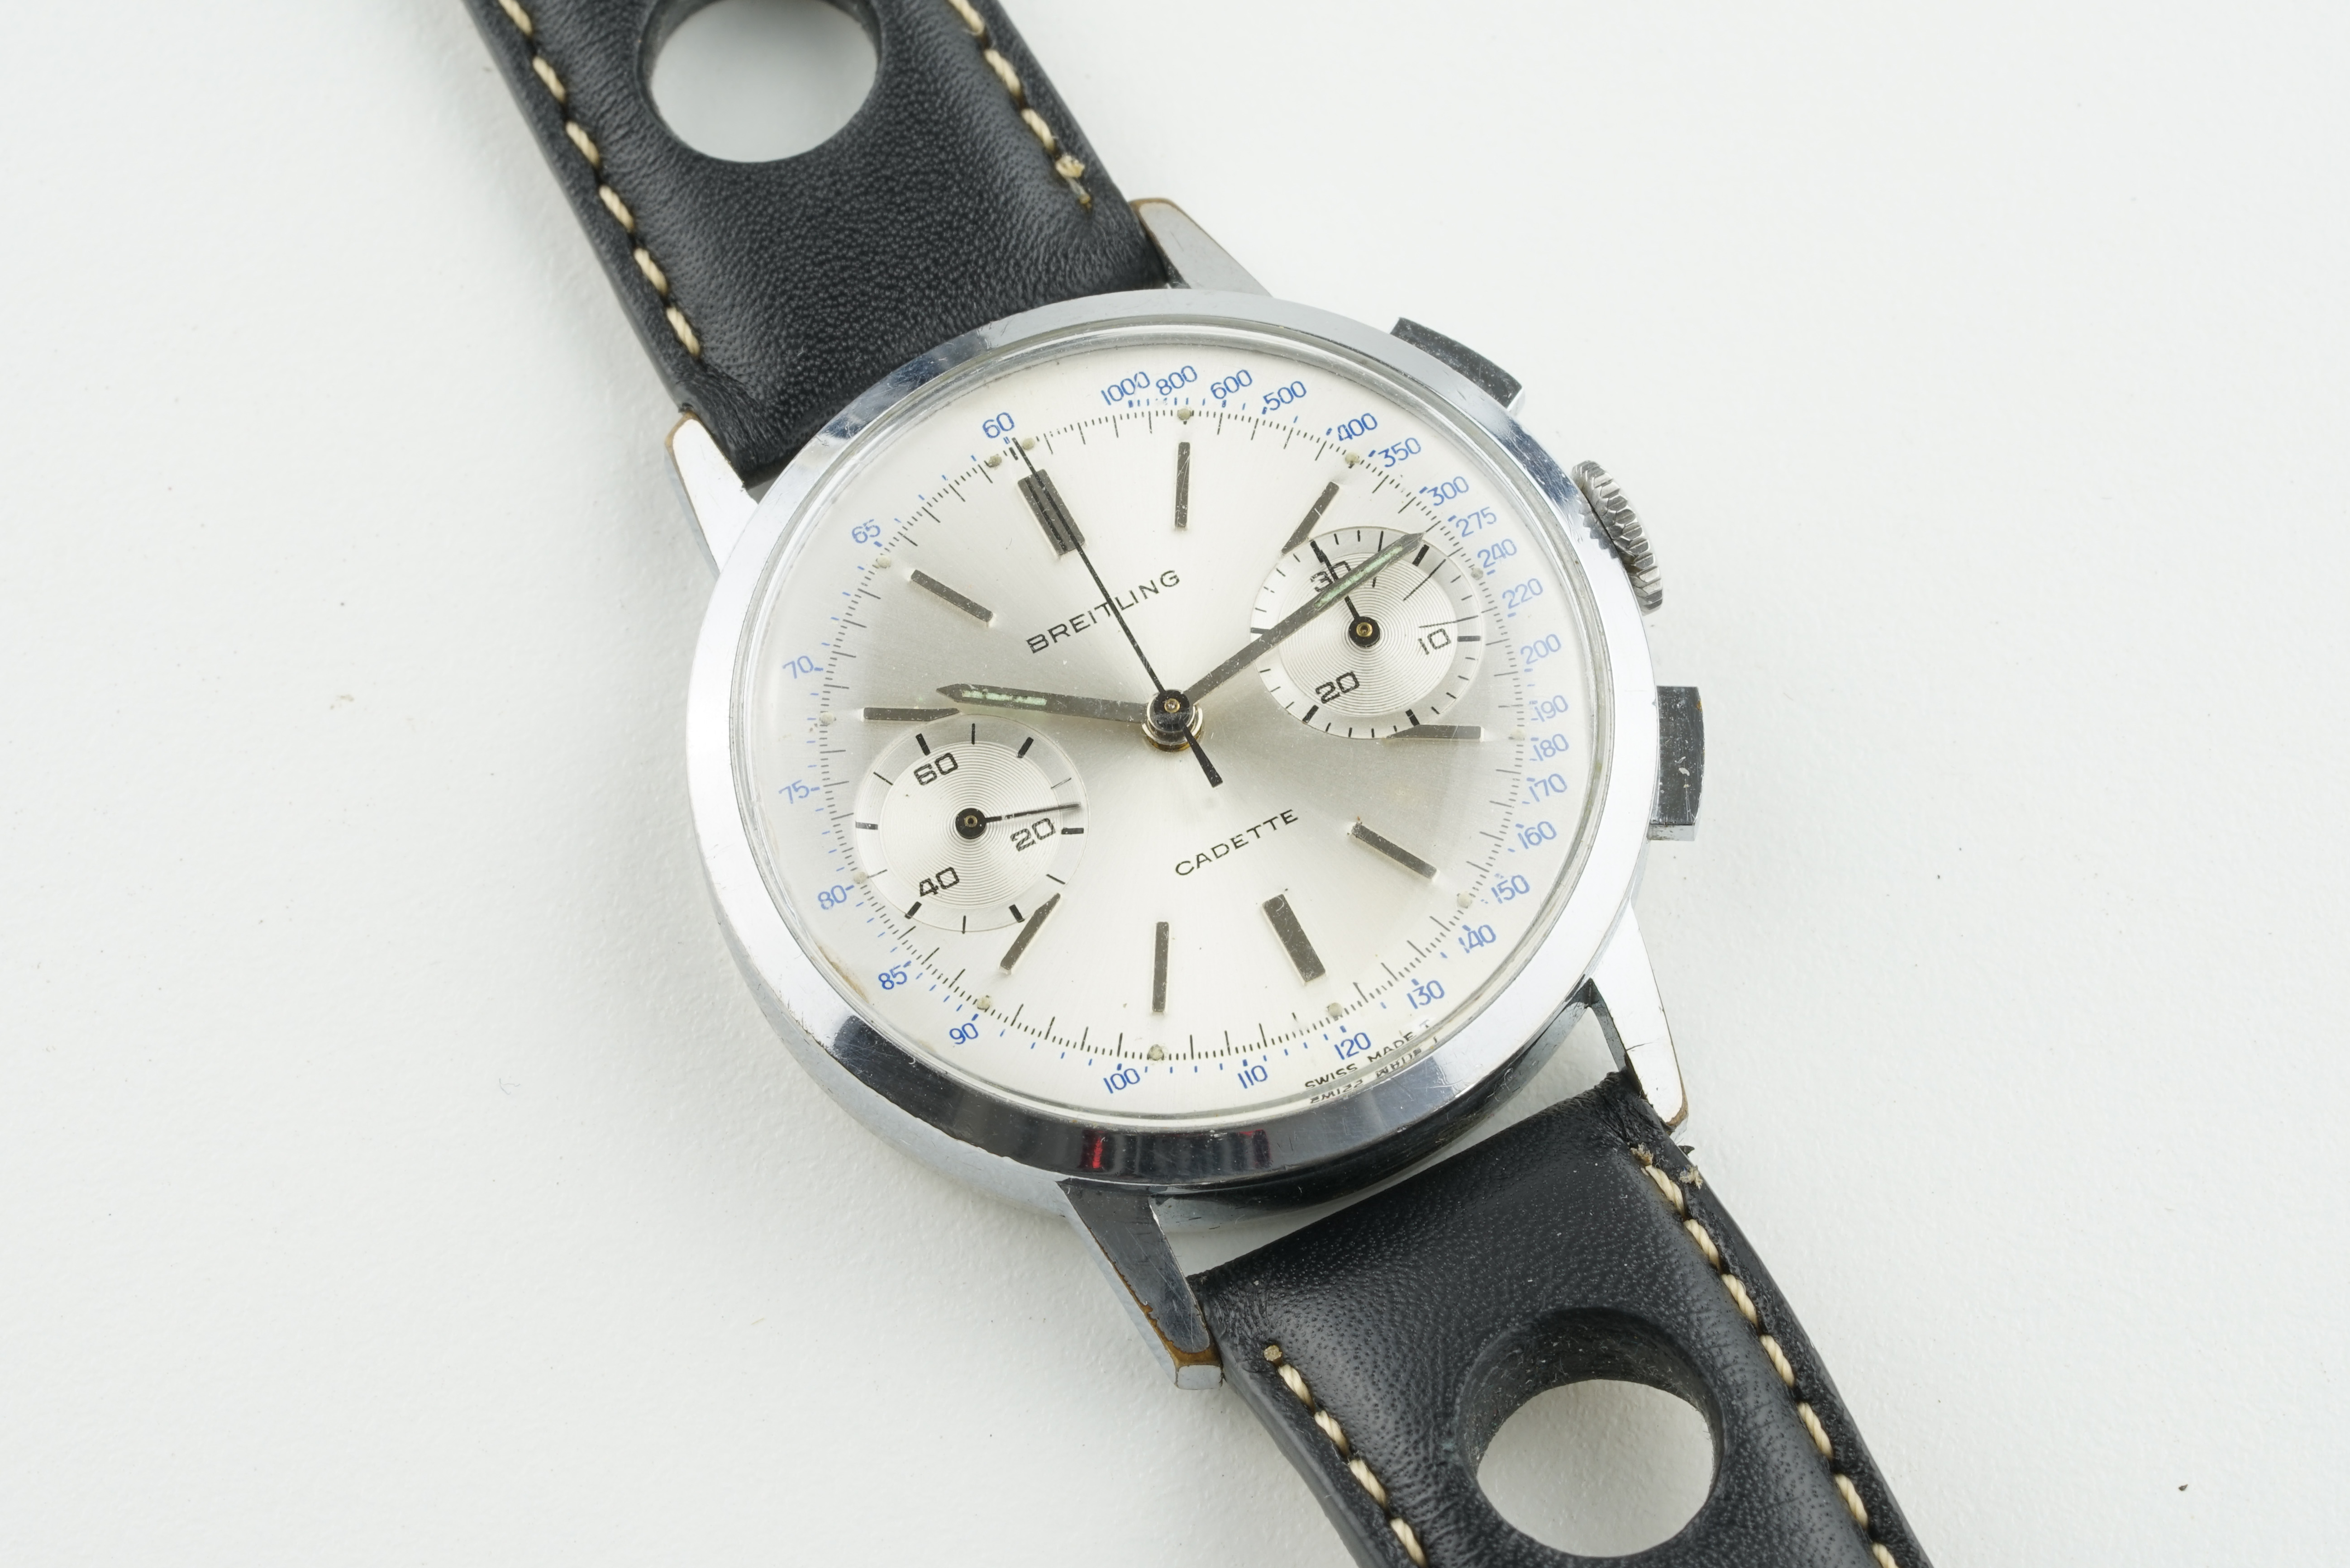 BREITLING CADETTE CHRONOGRAPH WRISTWATCH CIRCA 1970, circular silver twin register dial with applied